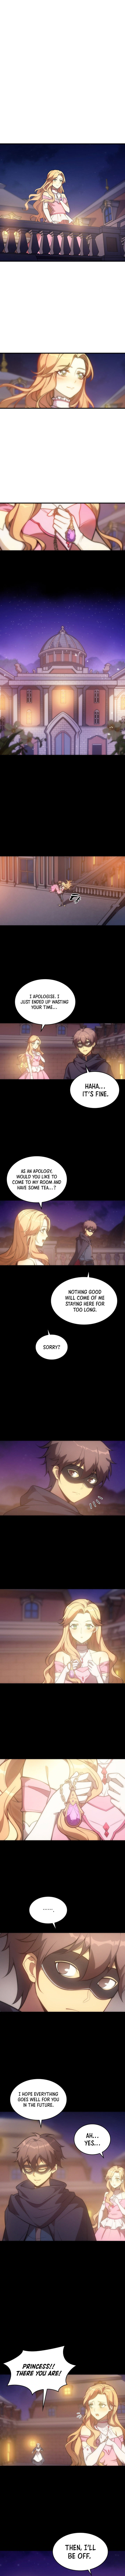 My Civil Servant Life Reborn in the Strange World - Chapter 13 Page 2